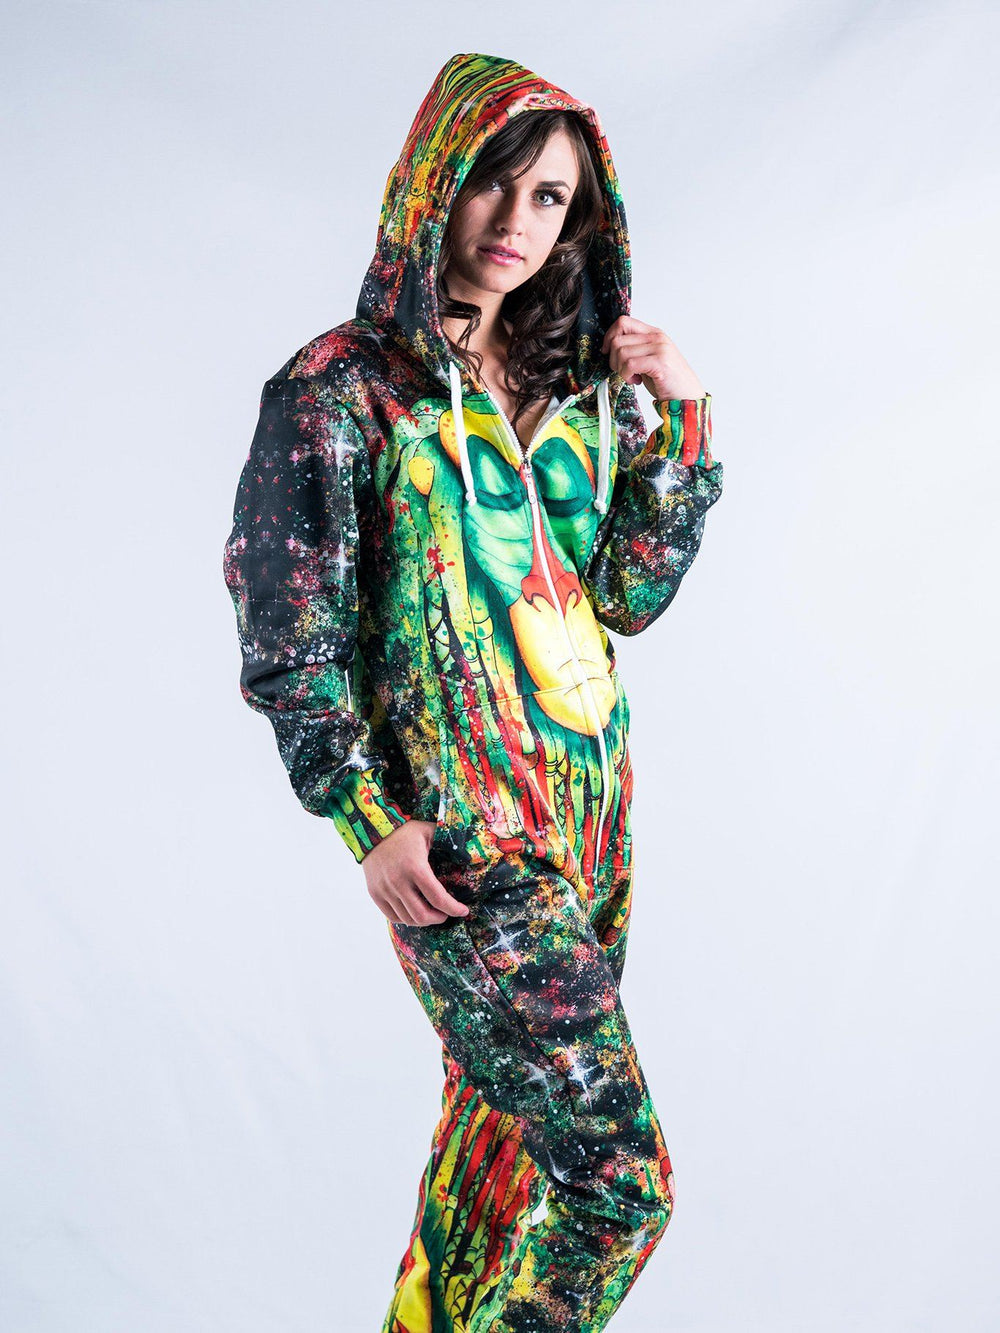 Onesies for Adults - Comfy & Stylish One-Piece Pajamas | ElectroThreads ...